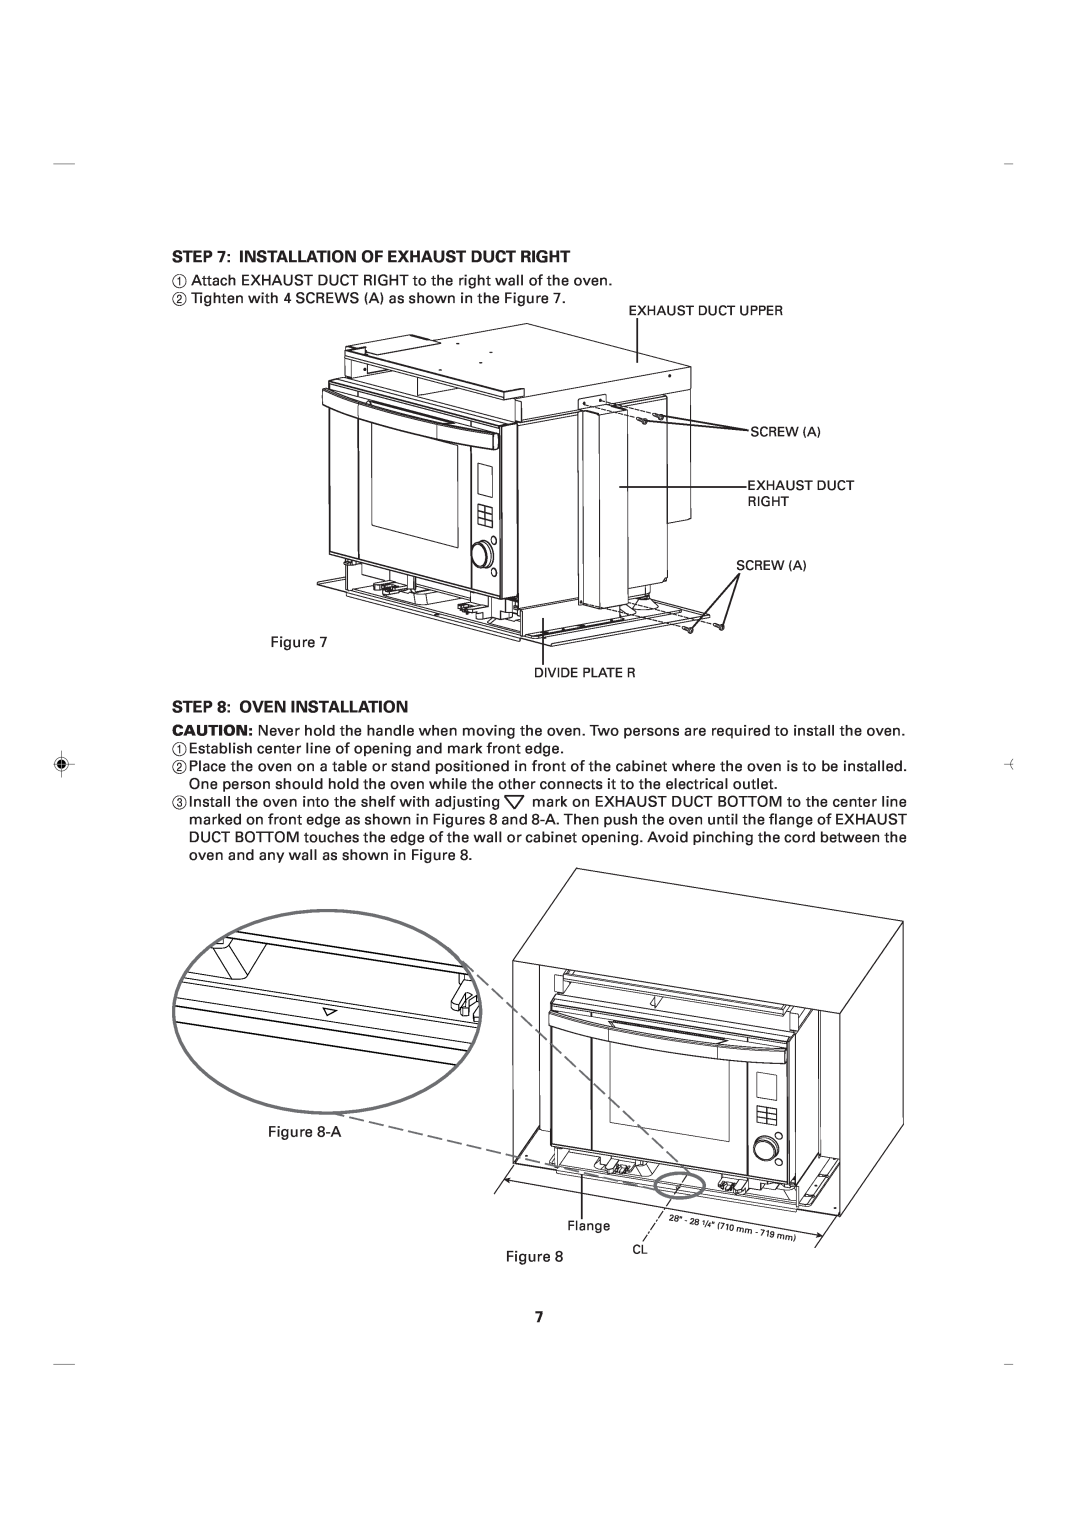 Sharp RK-12S30 installation instructions Installation Of Exhaust Duct Right, Oven Installation 